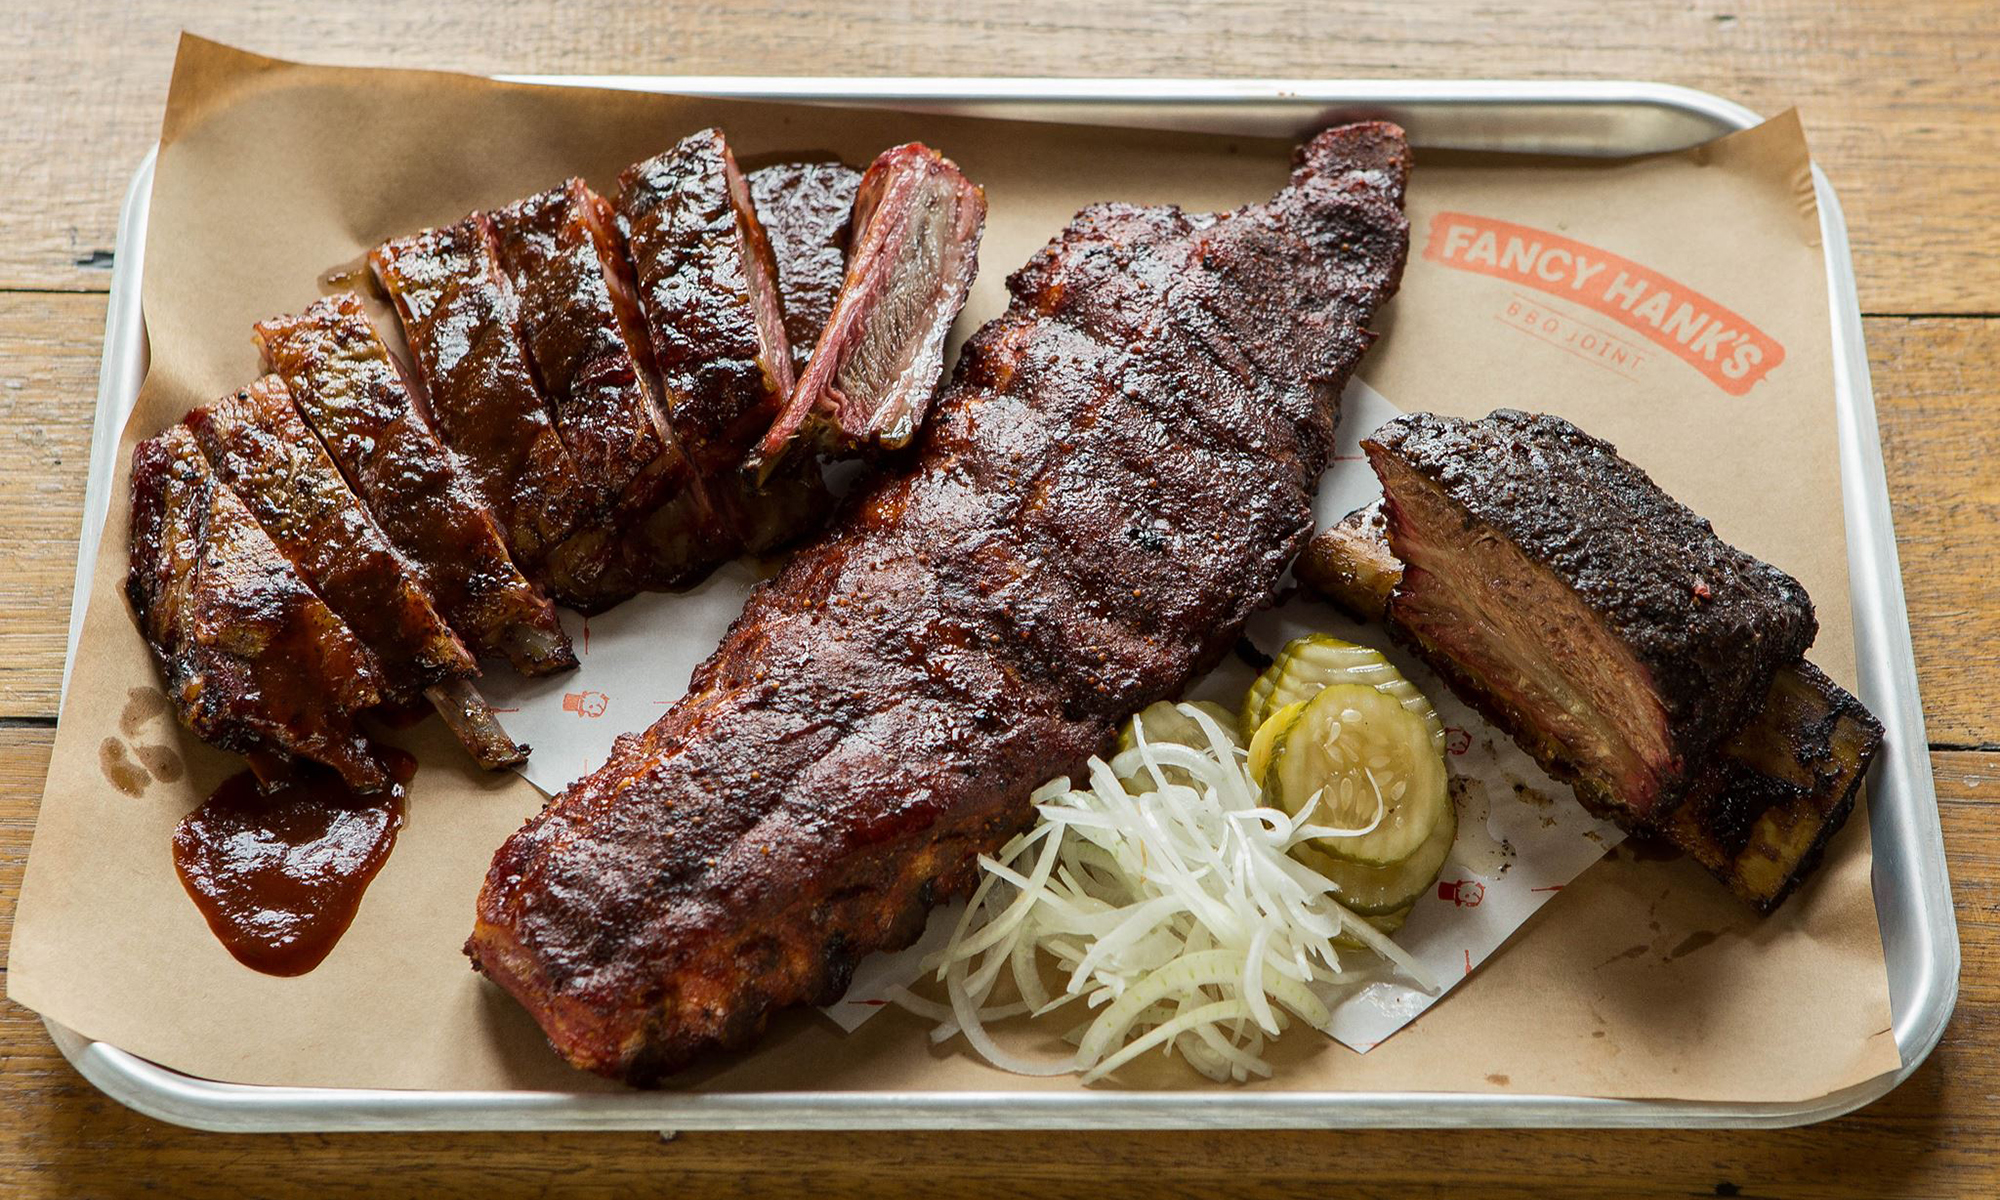 Free range BBQ meats come in the form of Angus beef brisket, beef short rib...